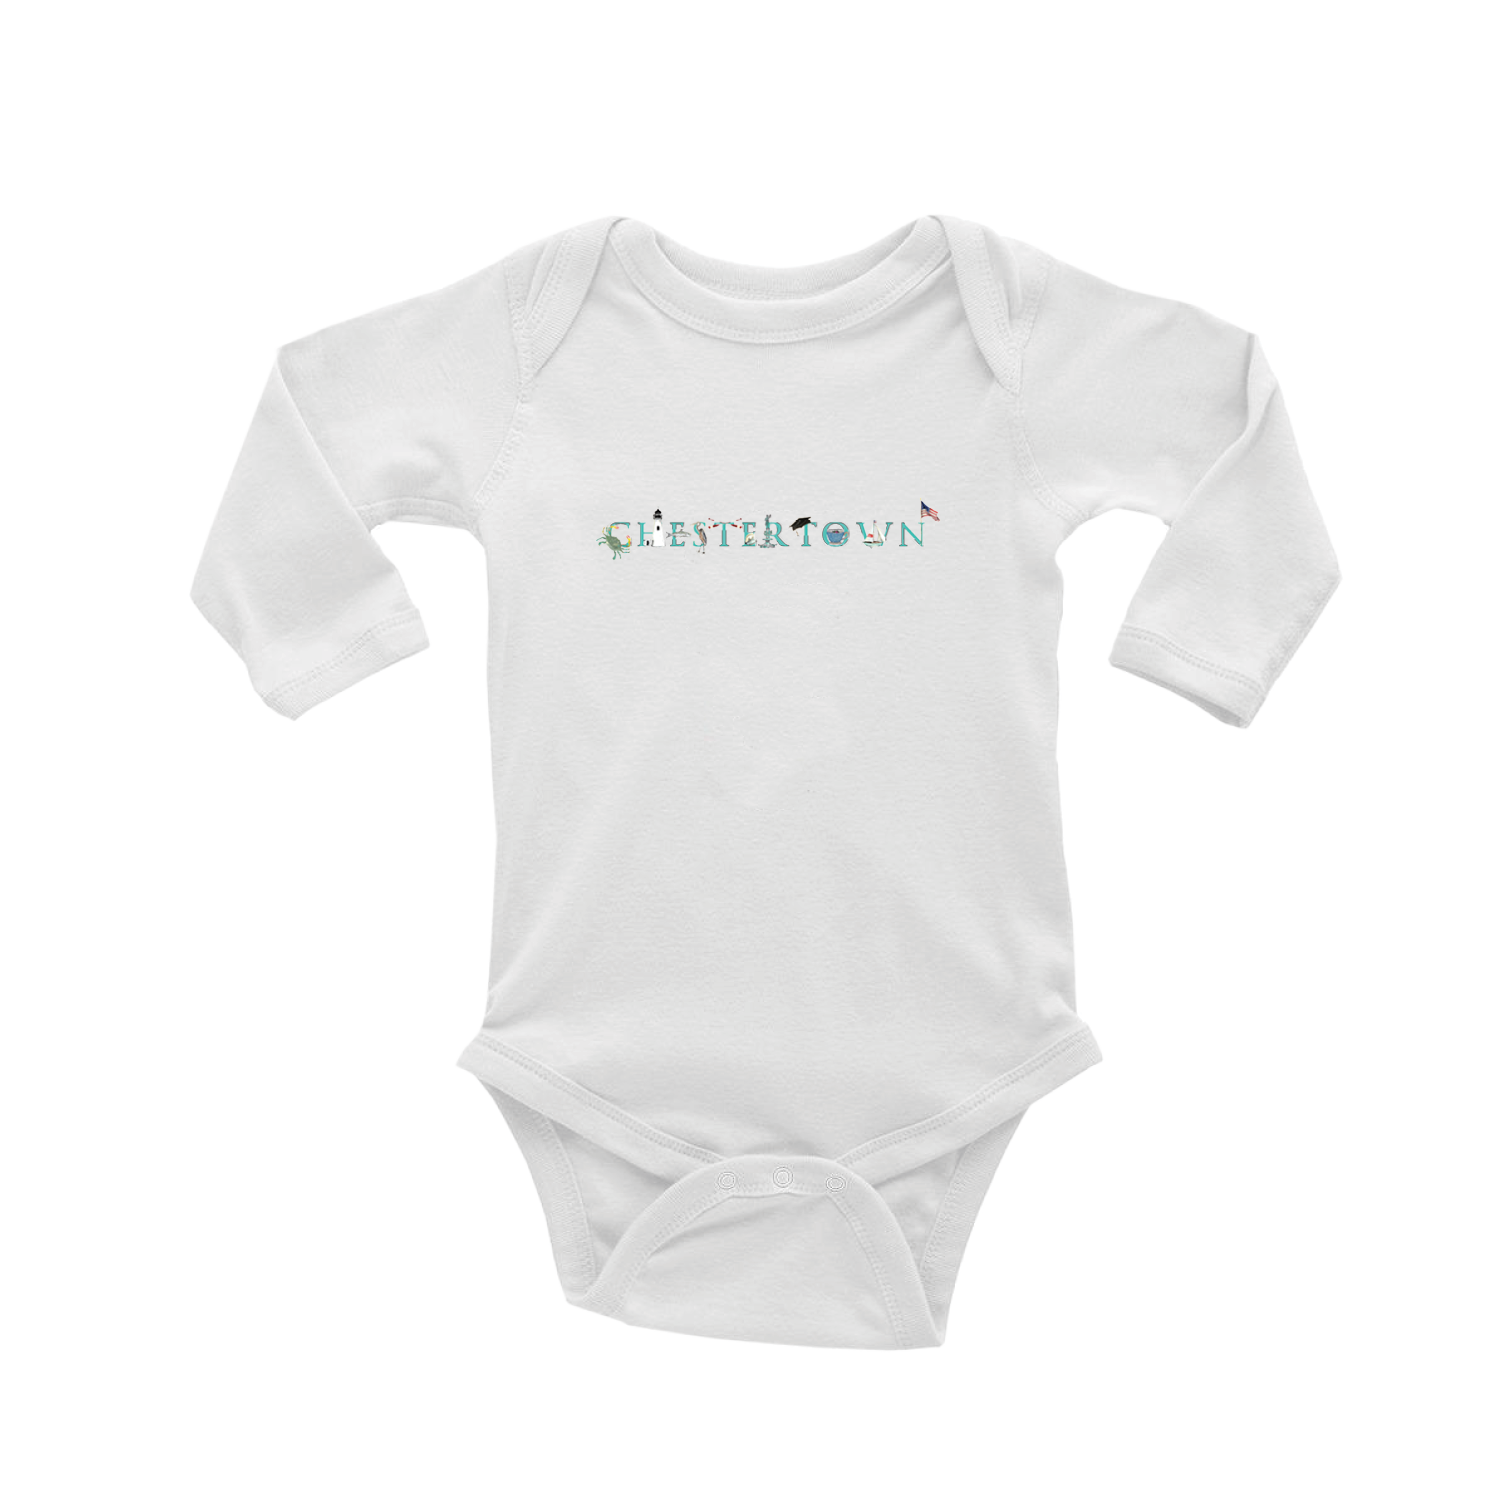 Chestertown baby snap up long sleeve